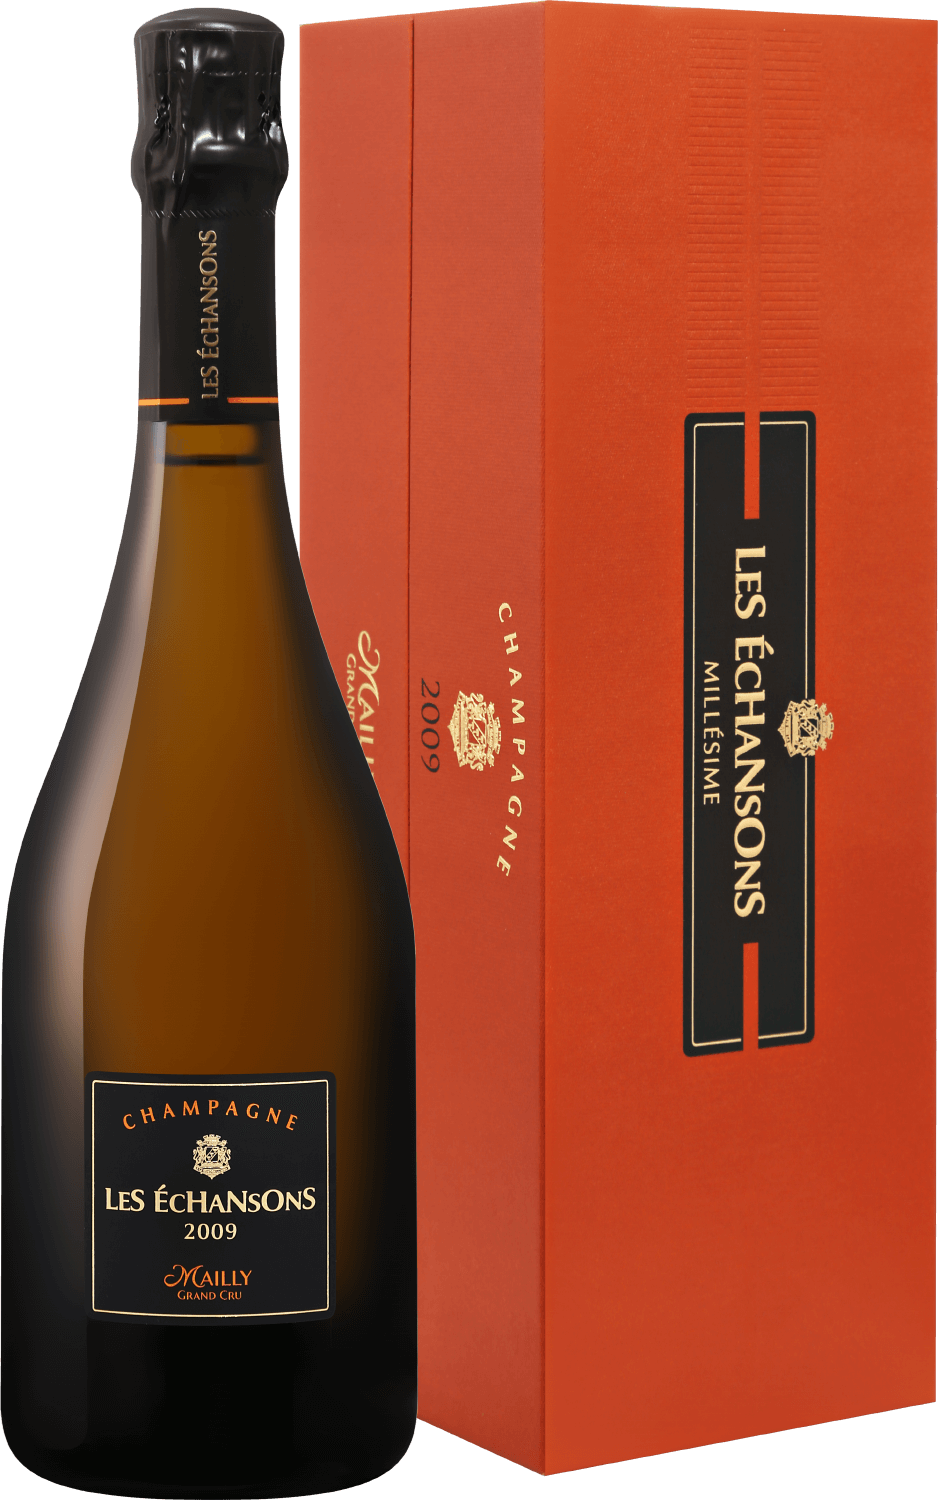 Mailly Grand Cru Les Échansons Brut Millesime Champagne AOC (gift box) lallier grand rose brut grand cru champagne aoc gift box